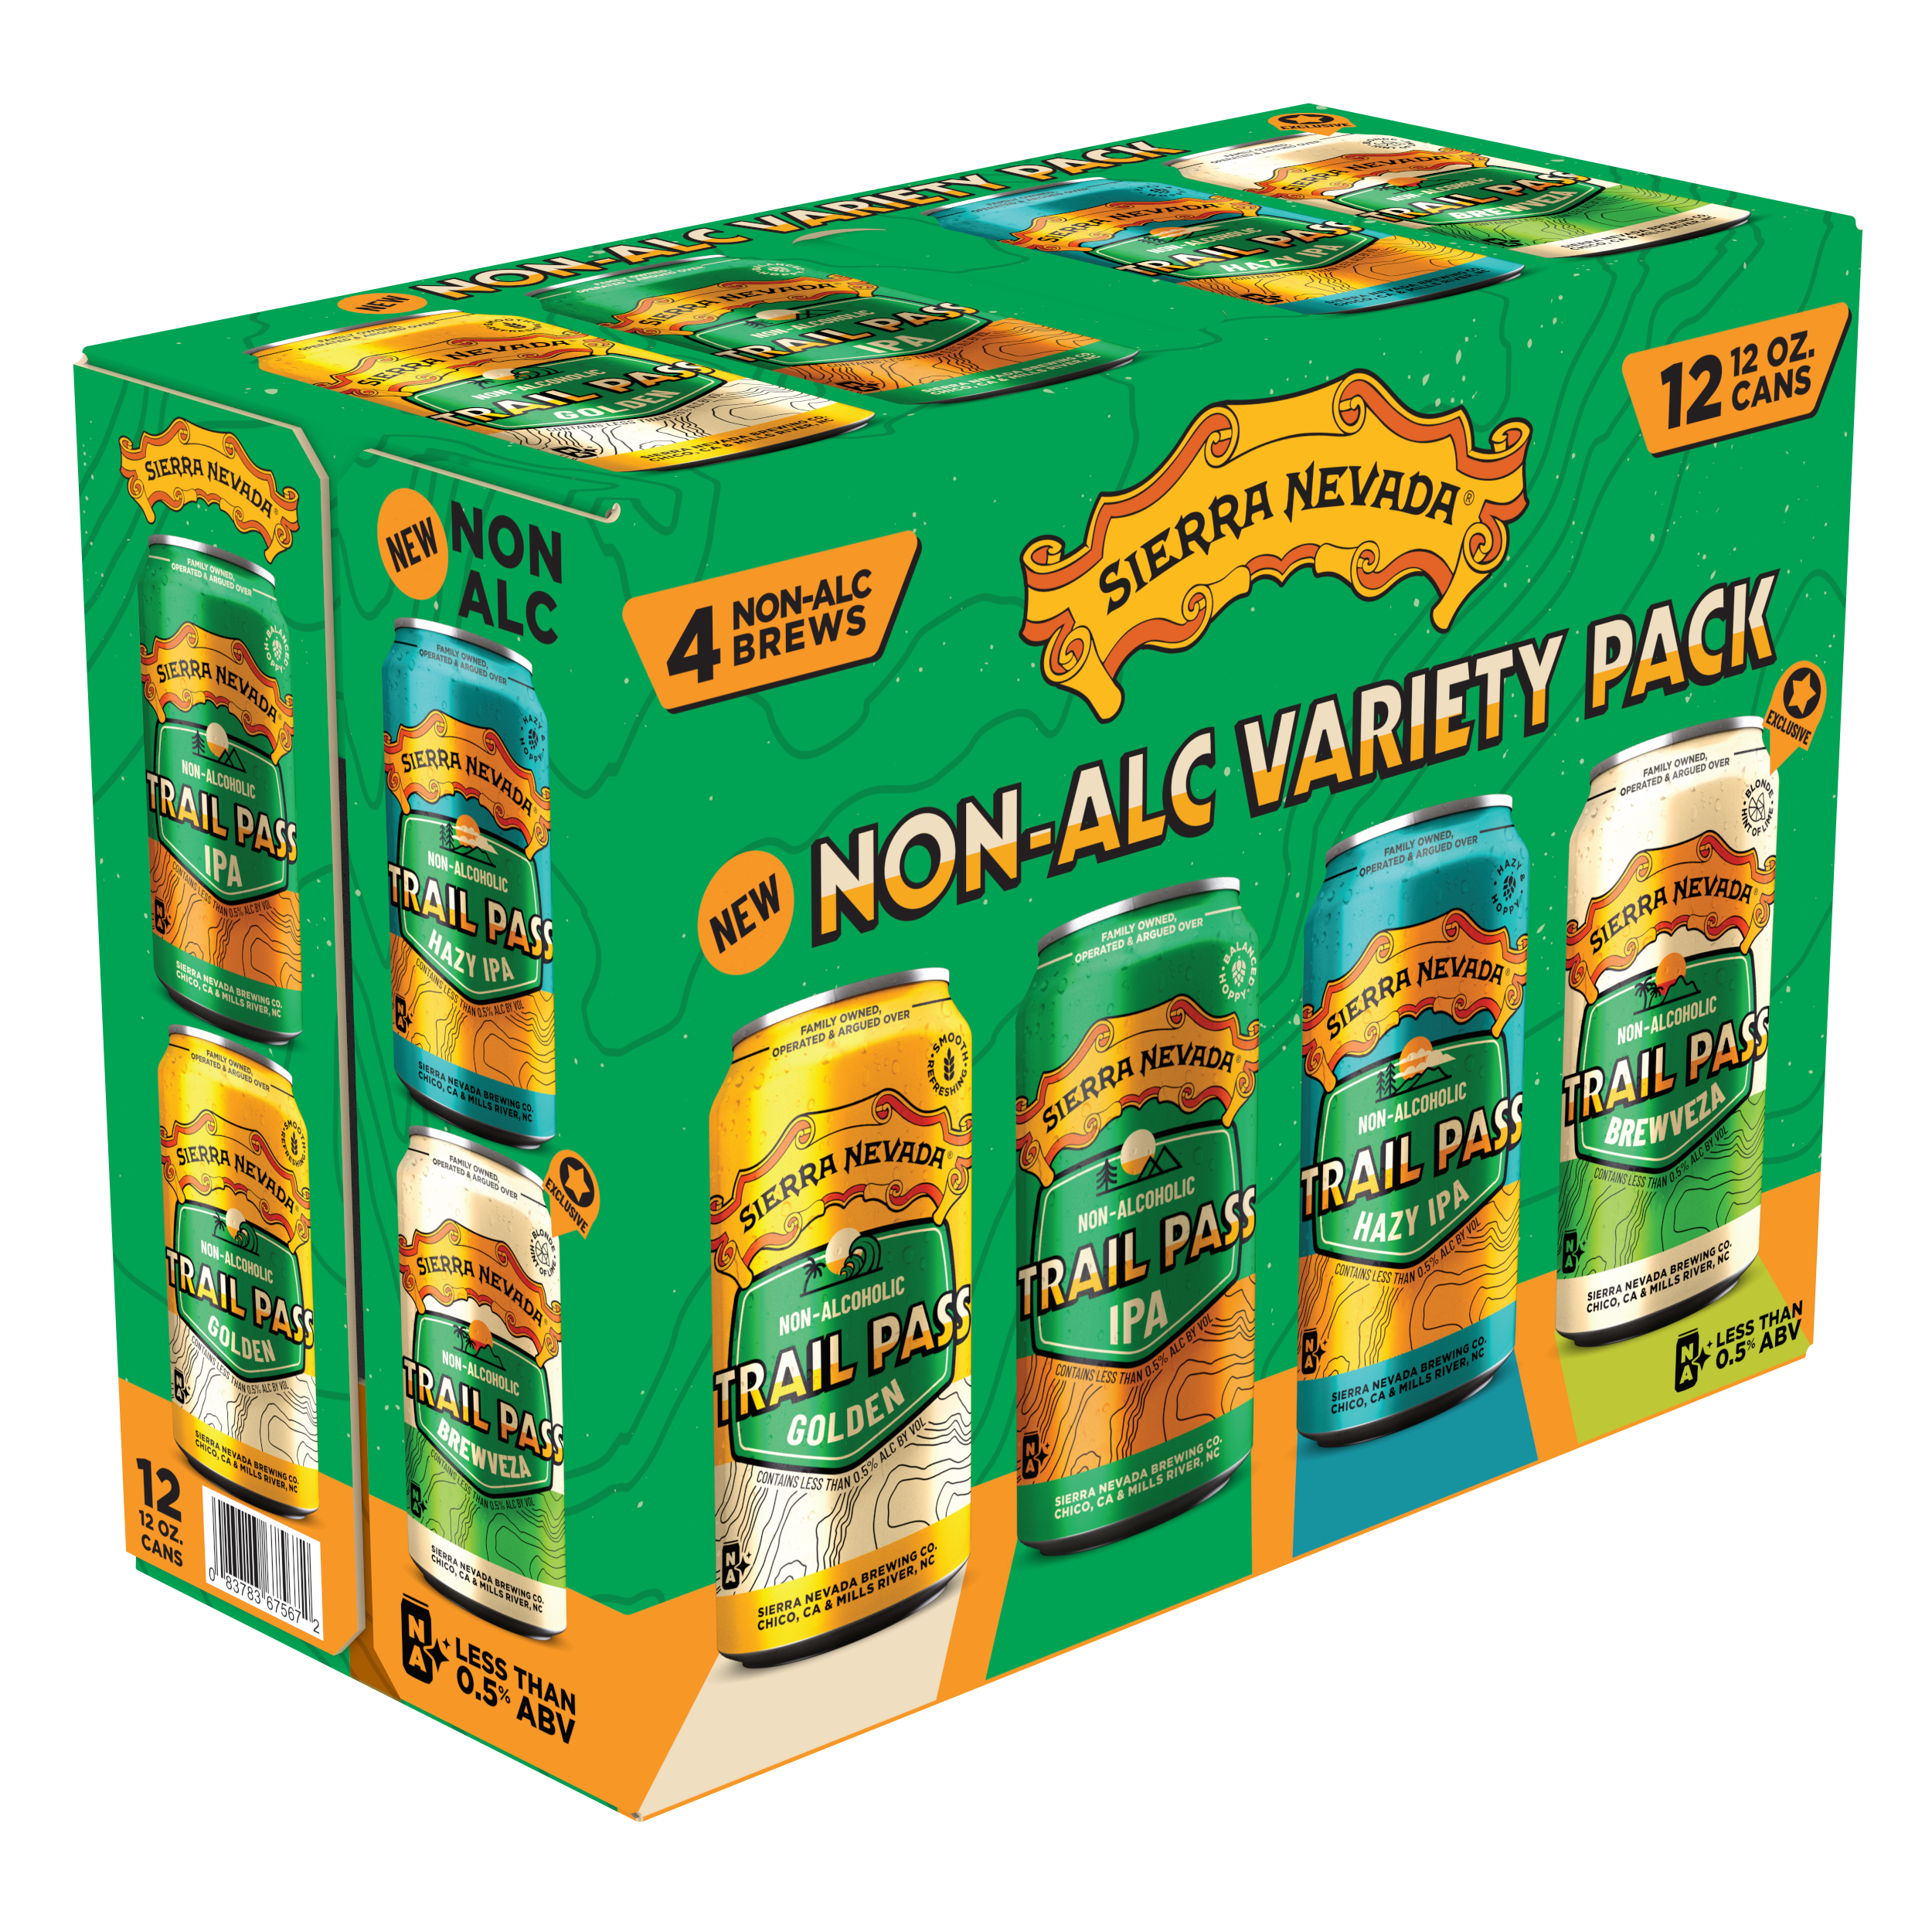 Sierra Nevada Brewing Co. 12-Pack Trail Pass Variety Pack - angled view